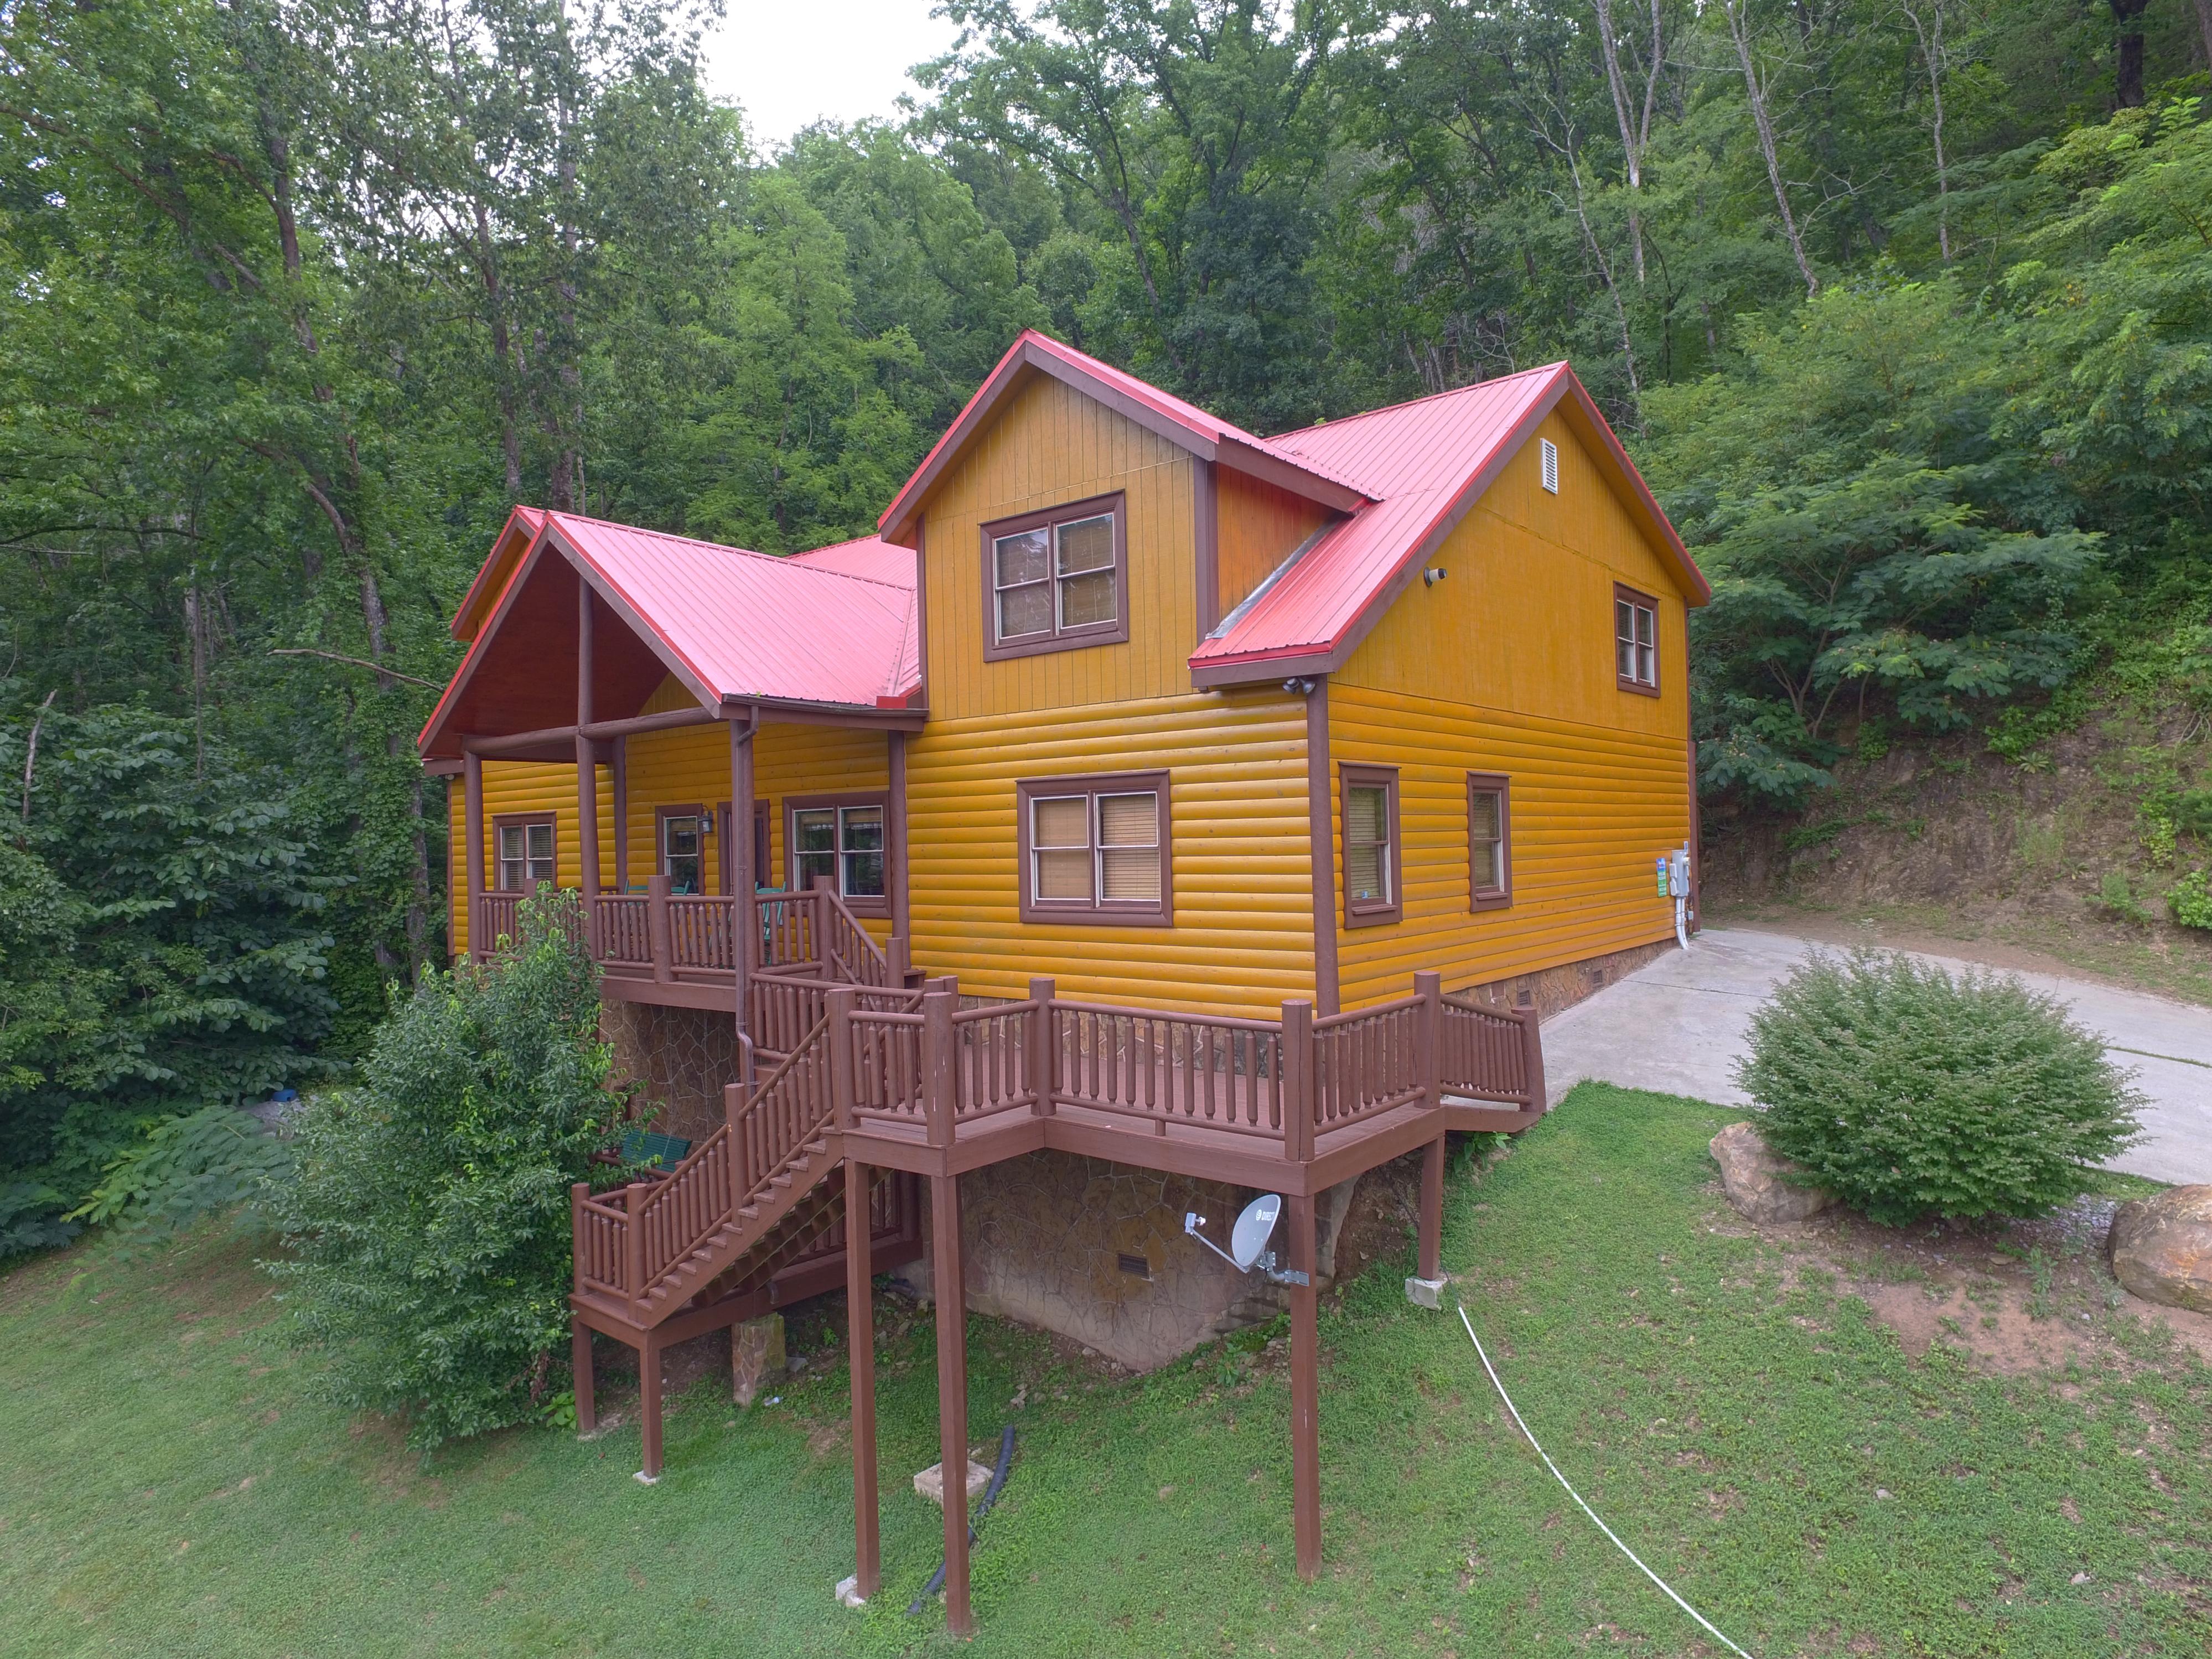 This large log cabin lodge is secluded with mountains views, private pool, video arcade game room, & so much more!